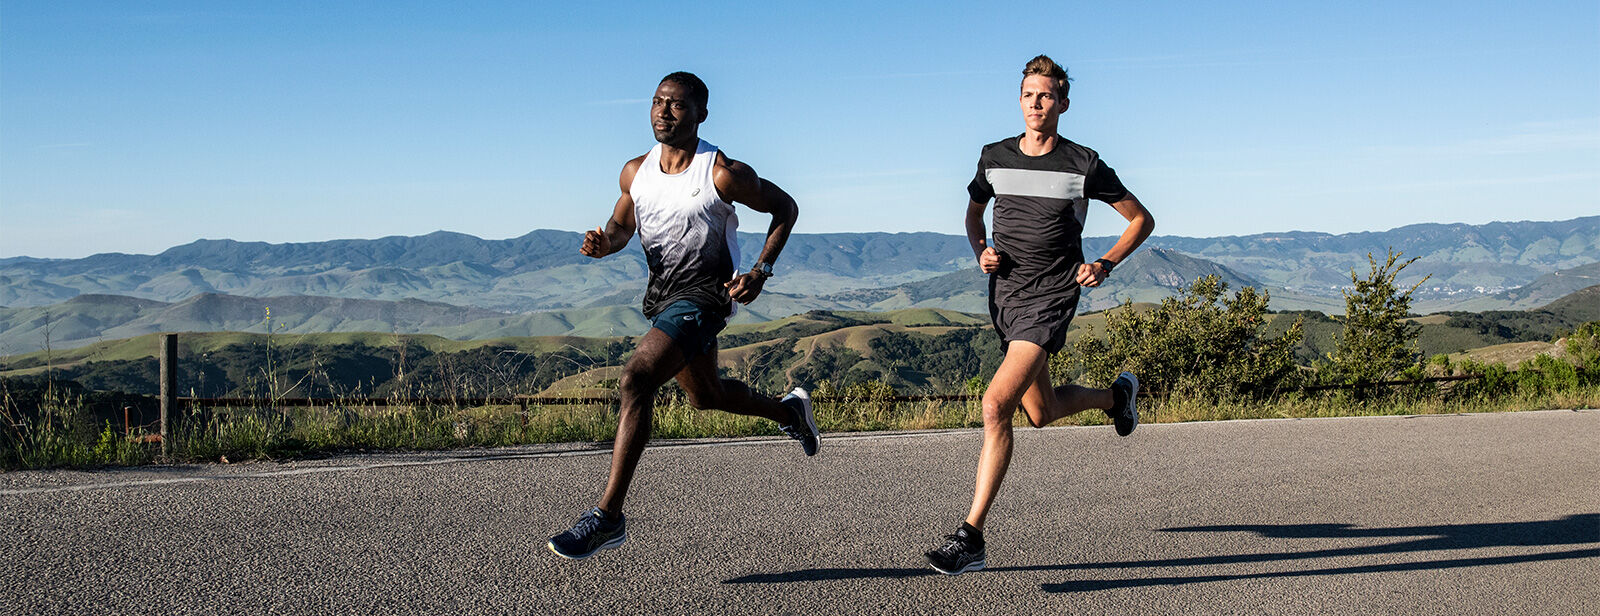 Natural Running: 4 Steps for the Best Experience | ASICS